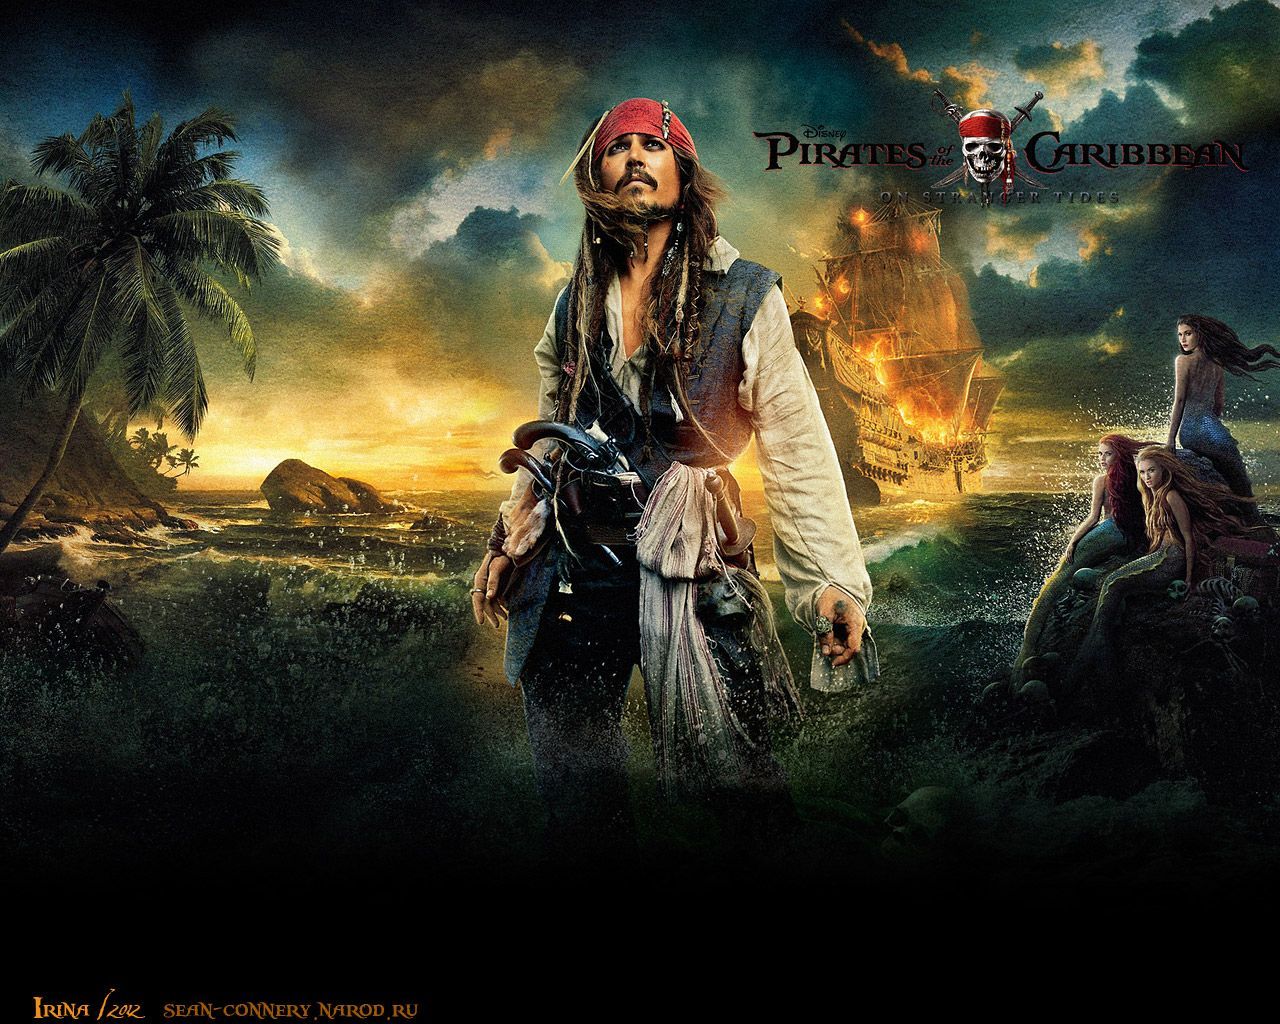 POTC wallpapers - Pirates of the Caribbean Wallpaper (32949178 ...